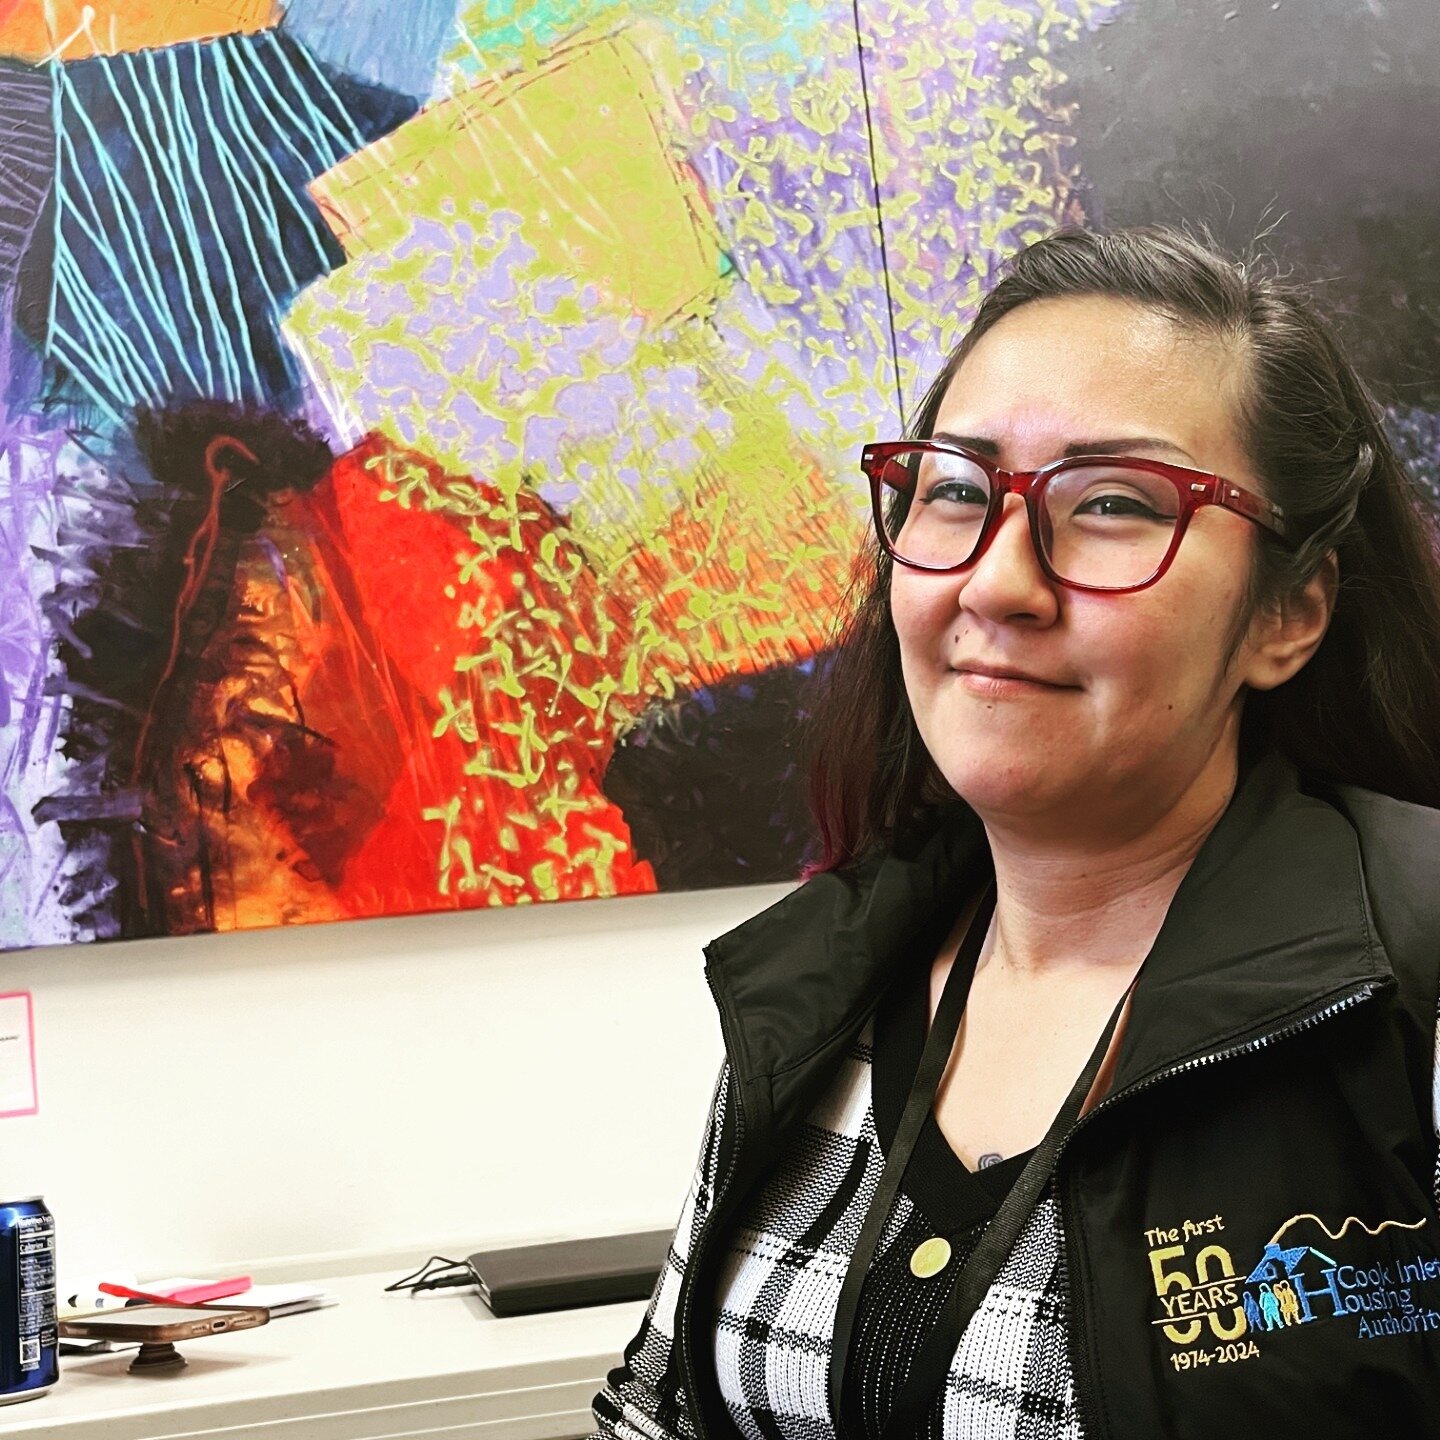 Louise Nevzoroff (Unangax̂) grew up in Atka, on the Aleutian Chain. She moved to Anchorage shortly after graduation and has lived here for 17 years. &quot;My dream job has always been in an office,&quot; she says. &quot;I always wanted my own office 